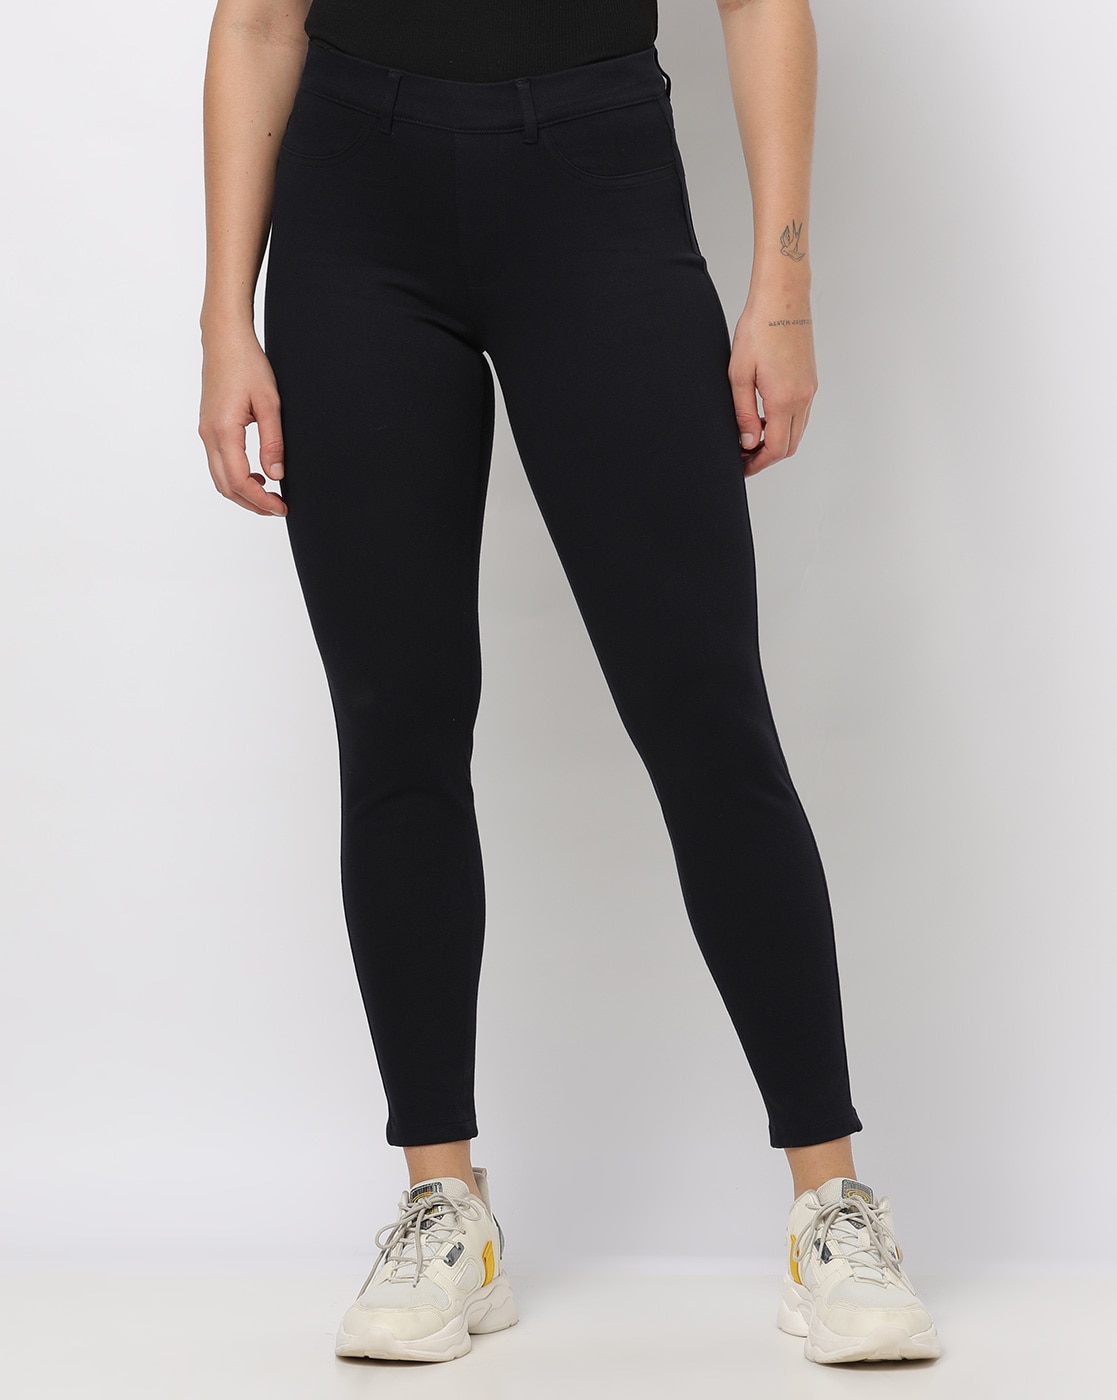 MISH Trousers and Pants  Buy MISH Navy Blue Scuba Pocket Style Skinny  Trouser Online  Nykaa Fashion